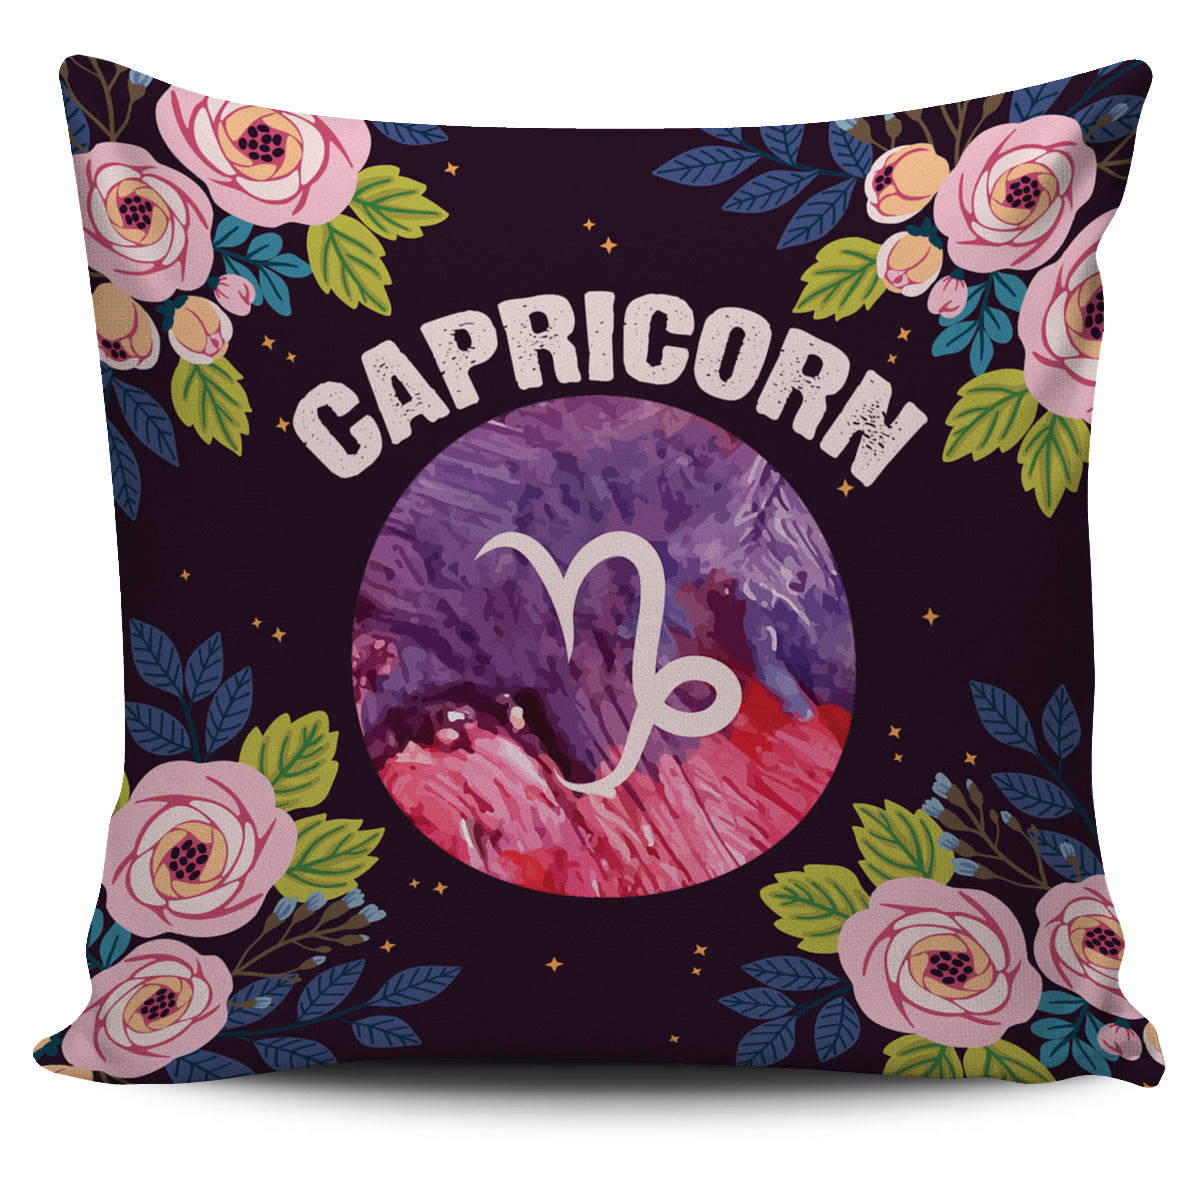 Capricorn Vibes Pillow Cover